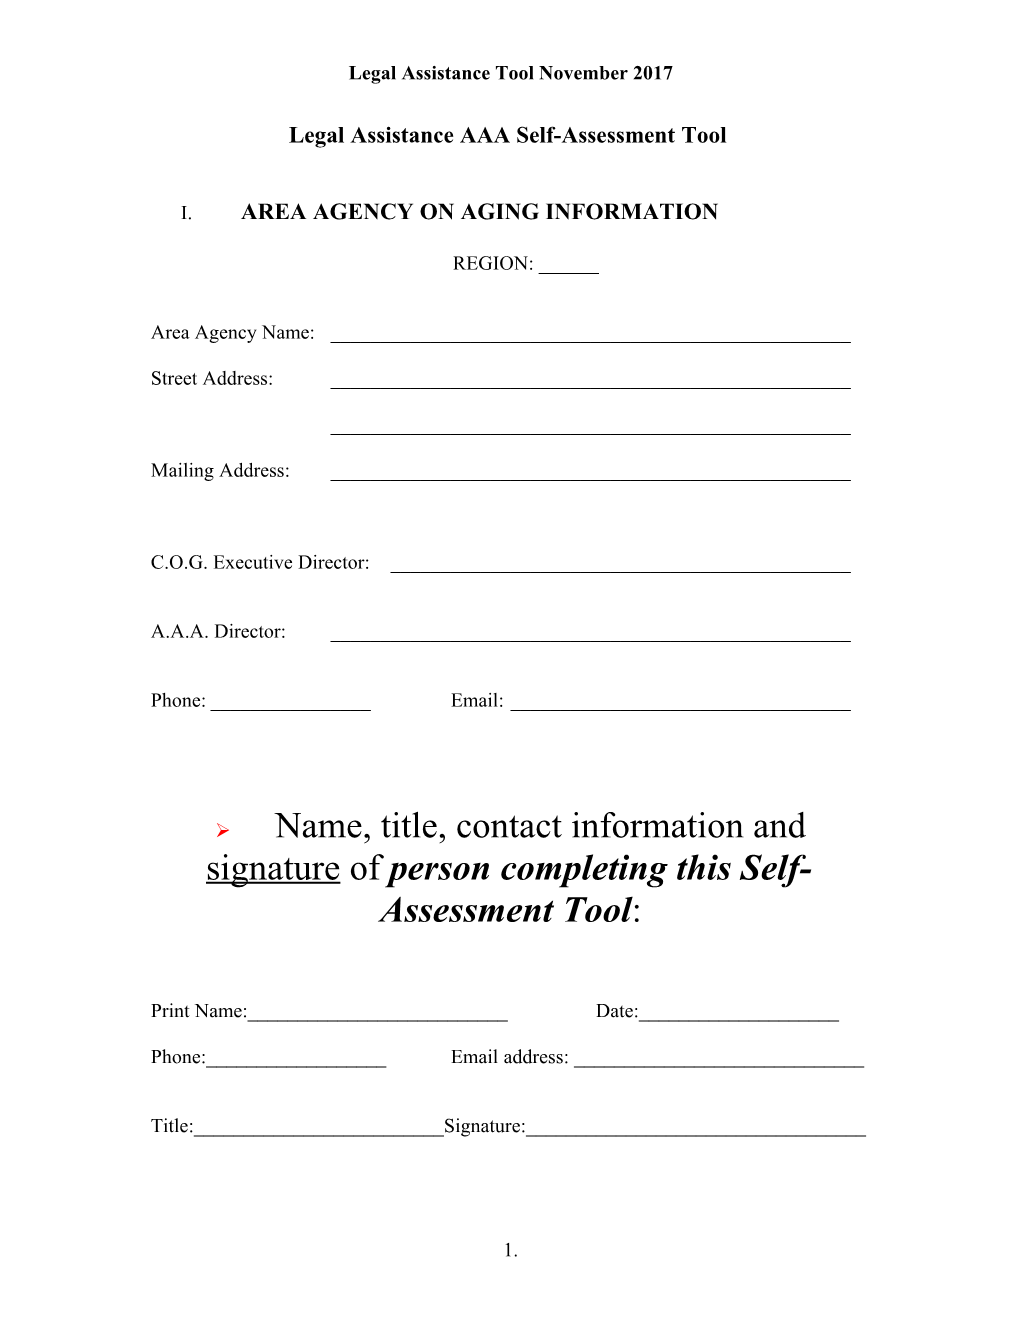 Legal Assistance AAA Self Assessment Tool